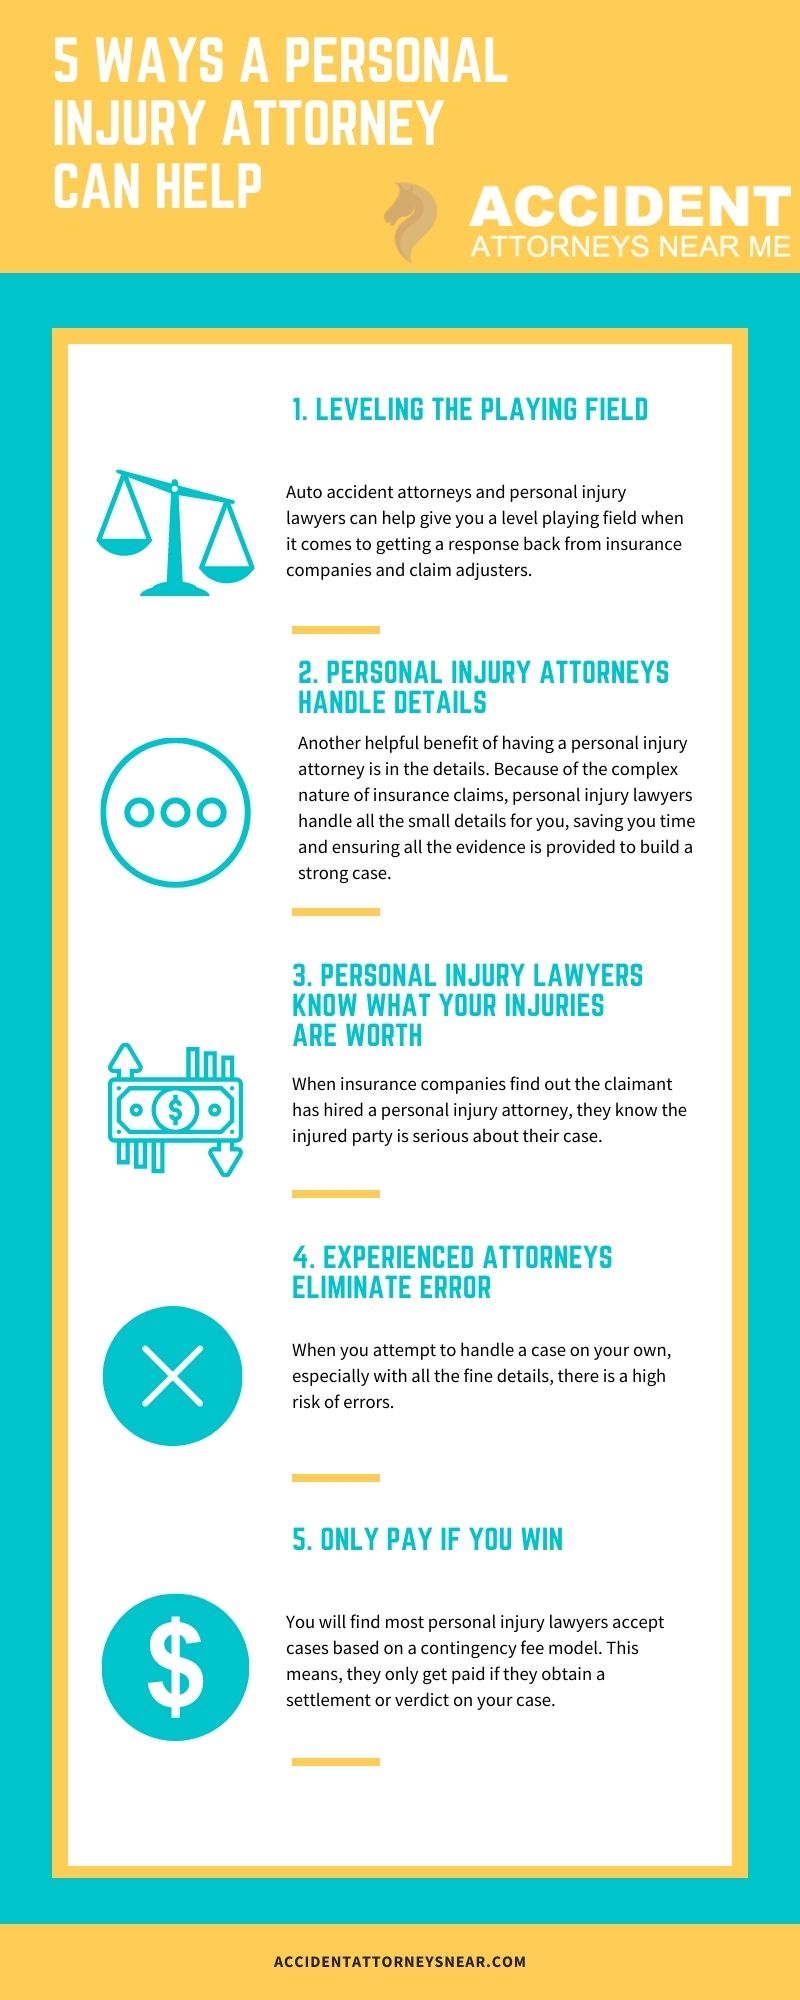 5 Ways A Personal Injury Attorney Can Help